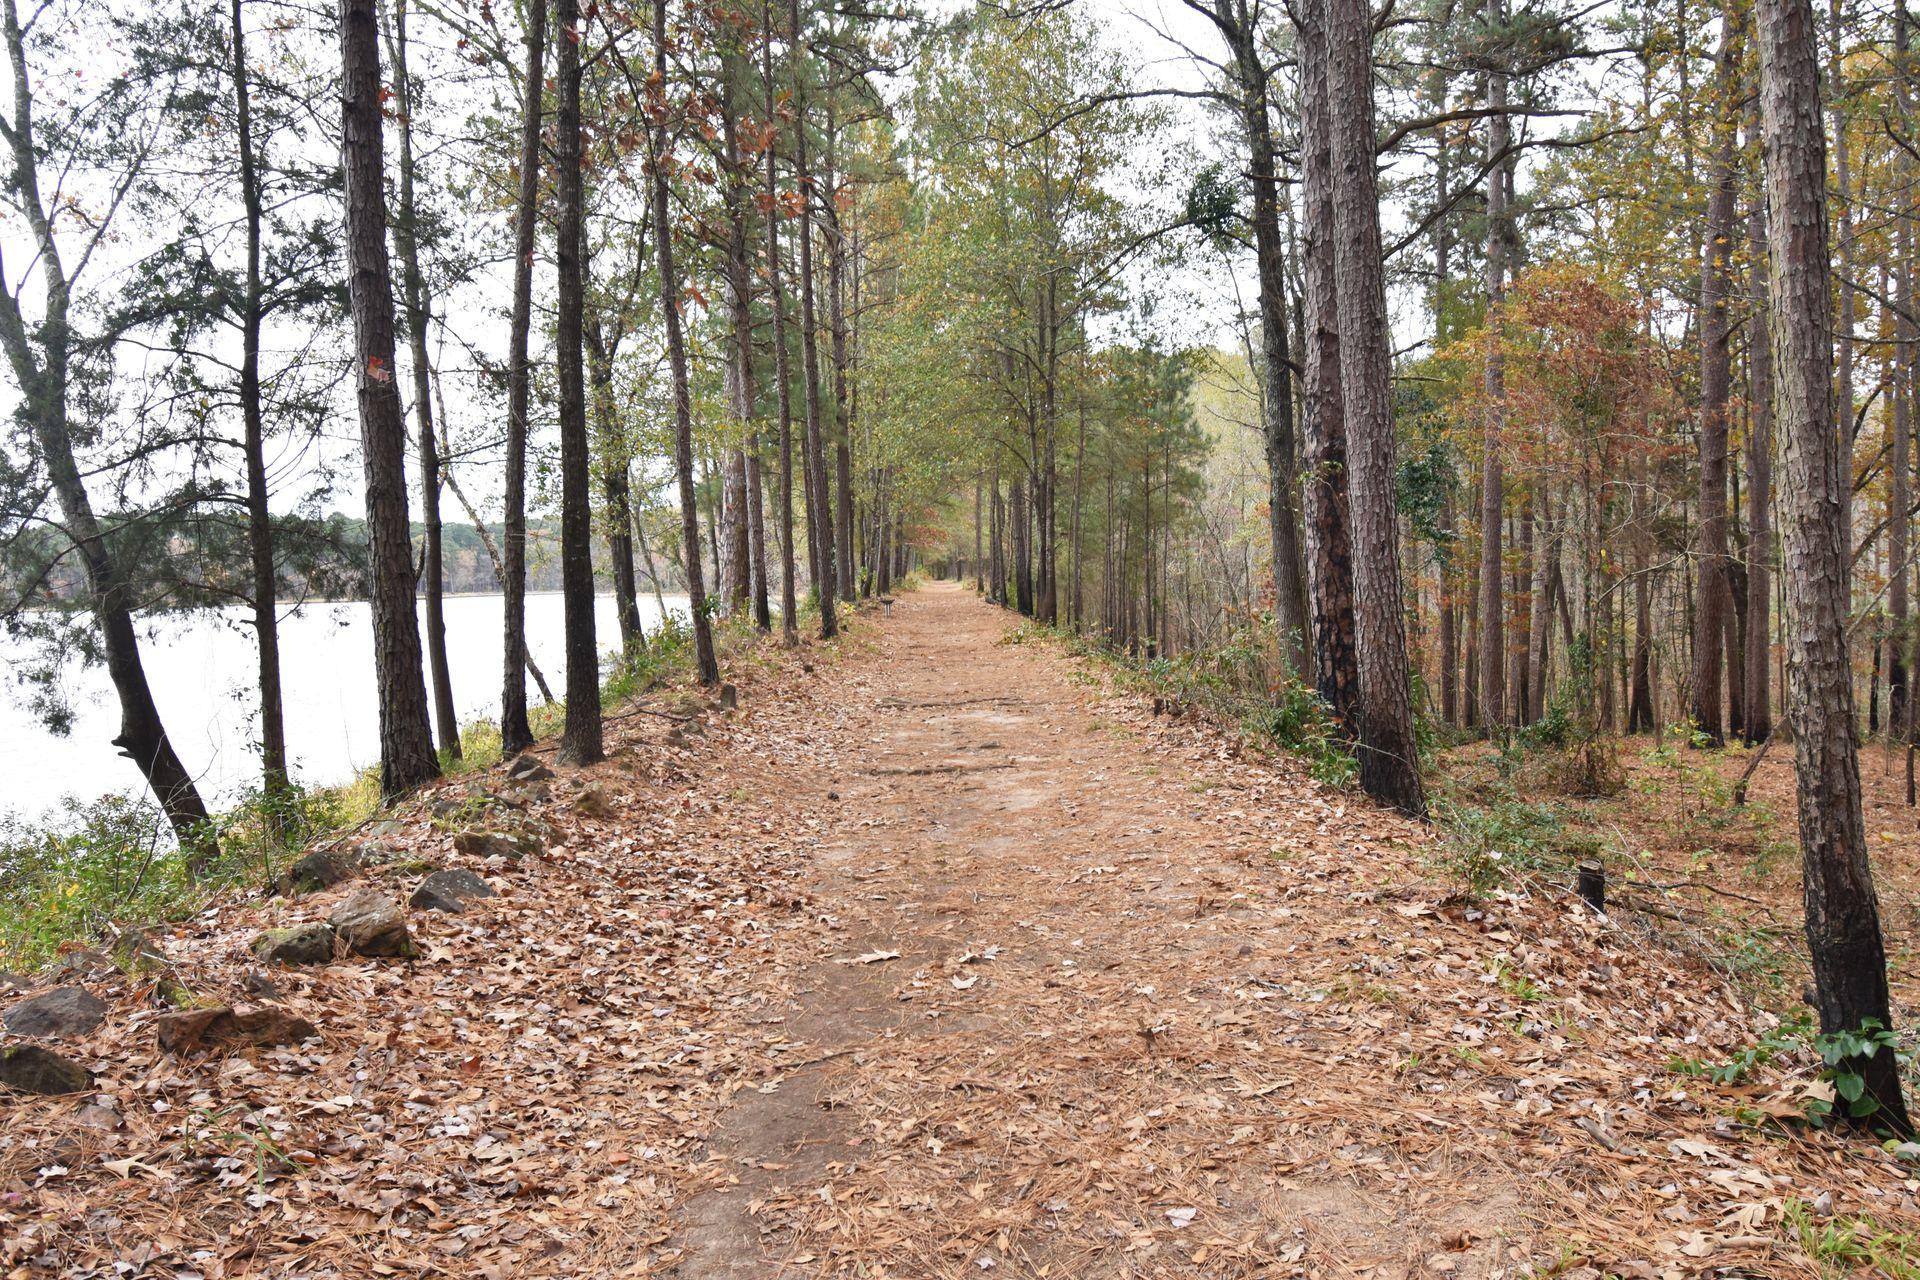 A wide path that has trees on either side and leaves on the ground. There is a lake to the left of the trail.